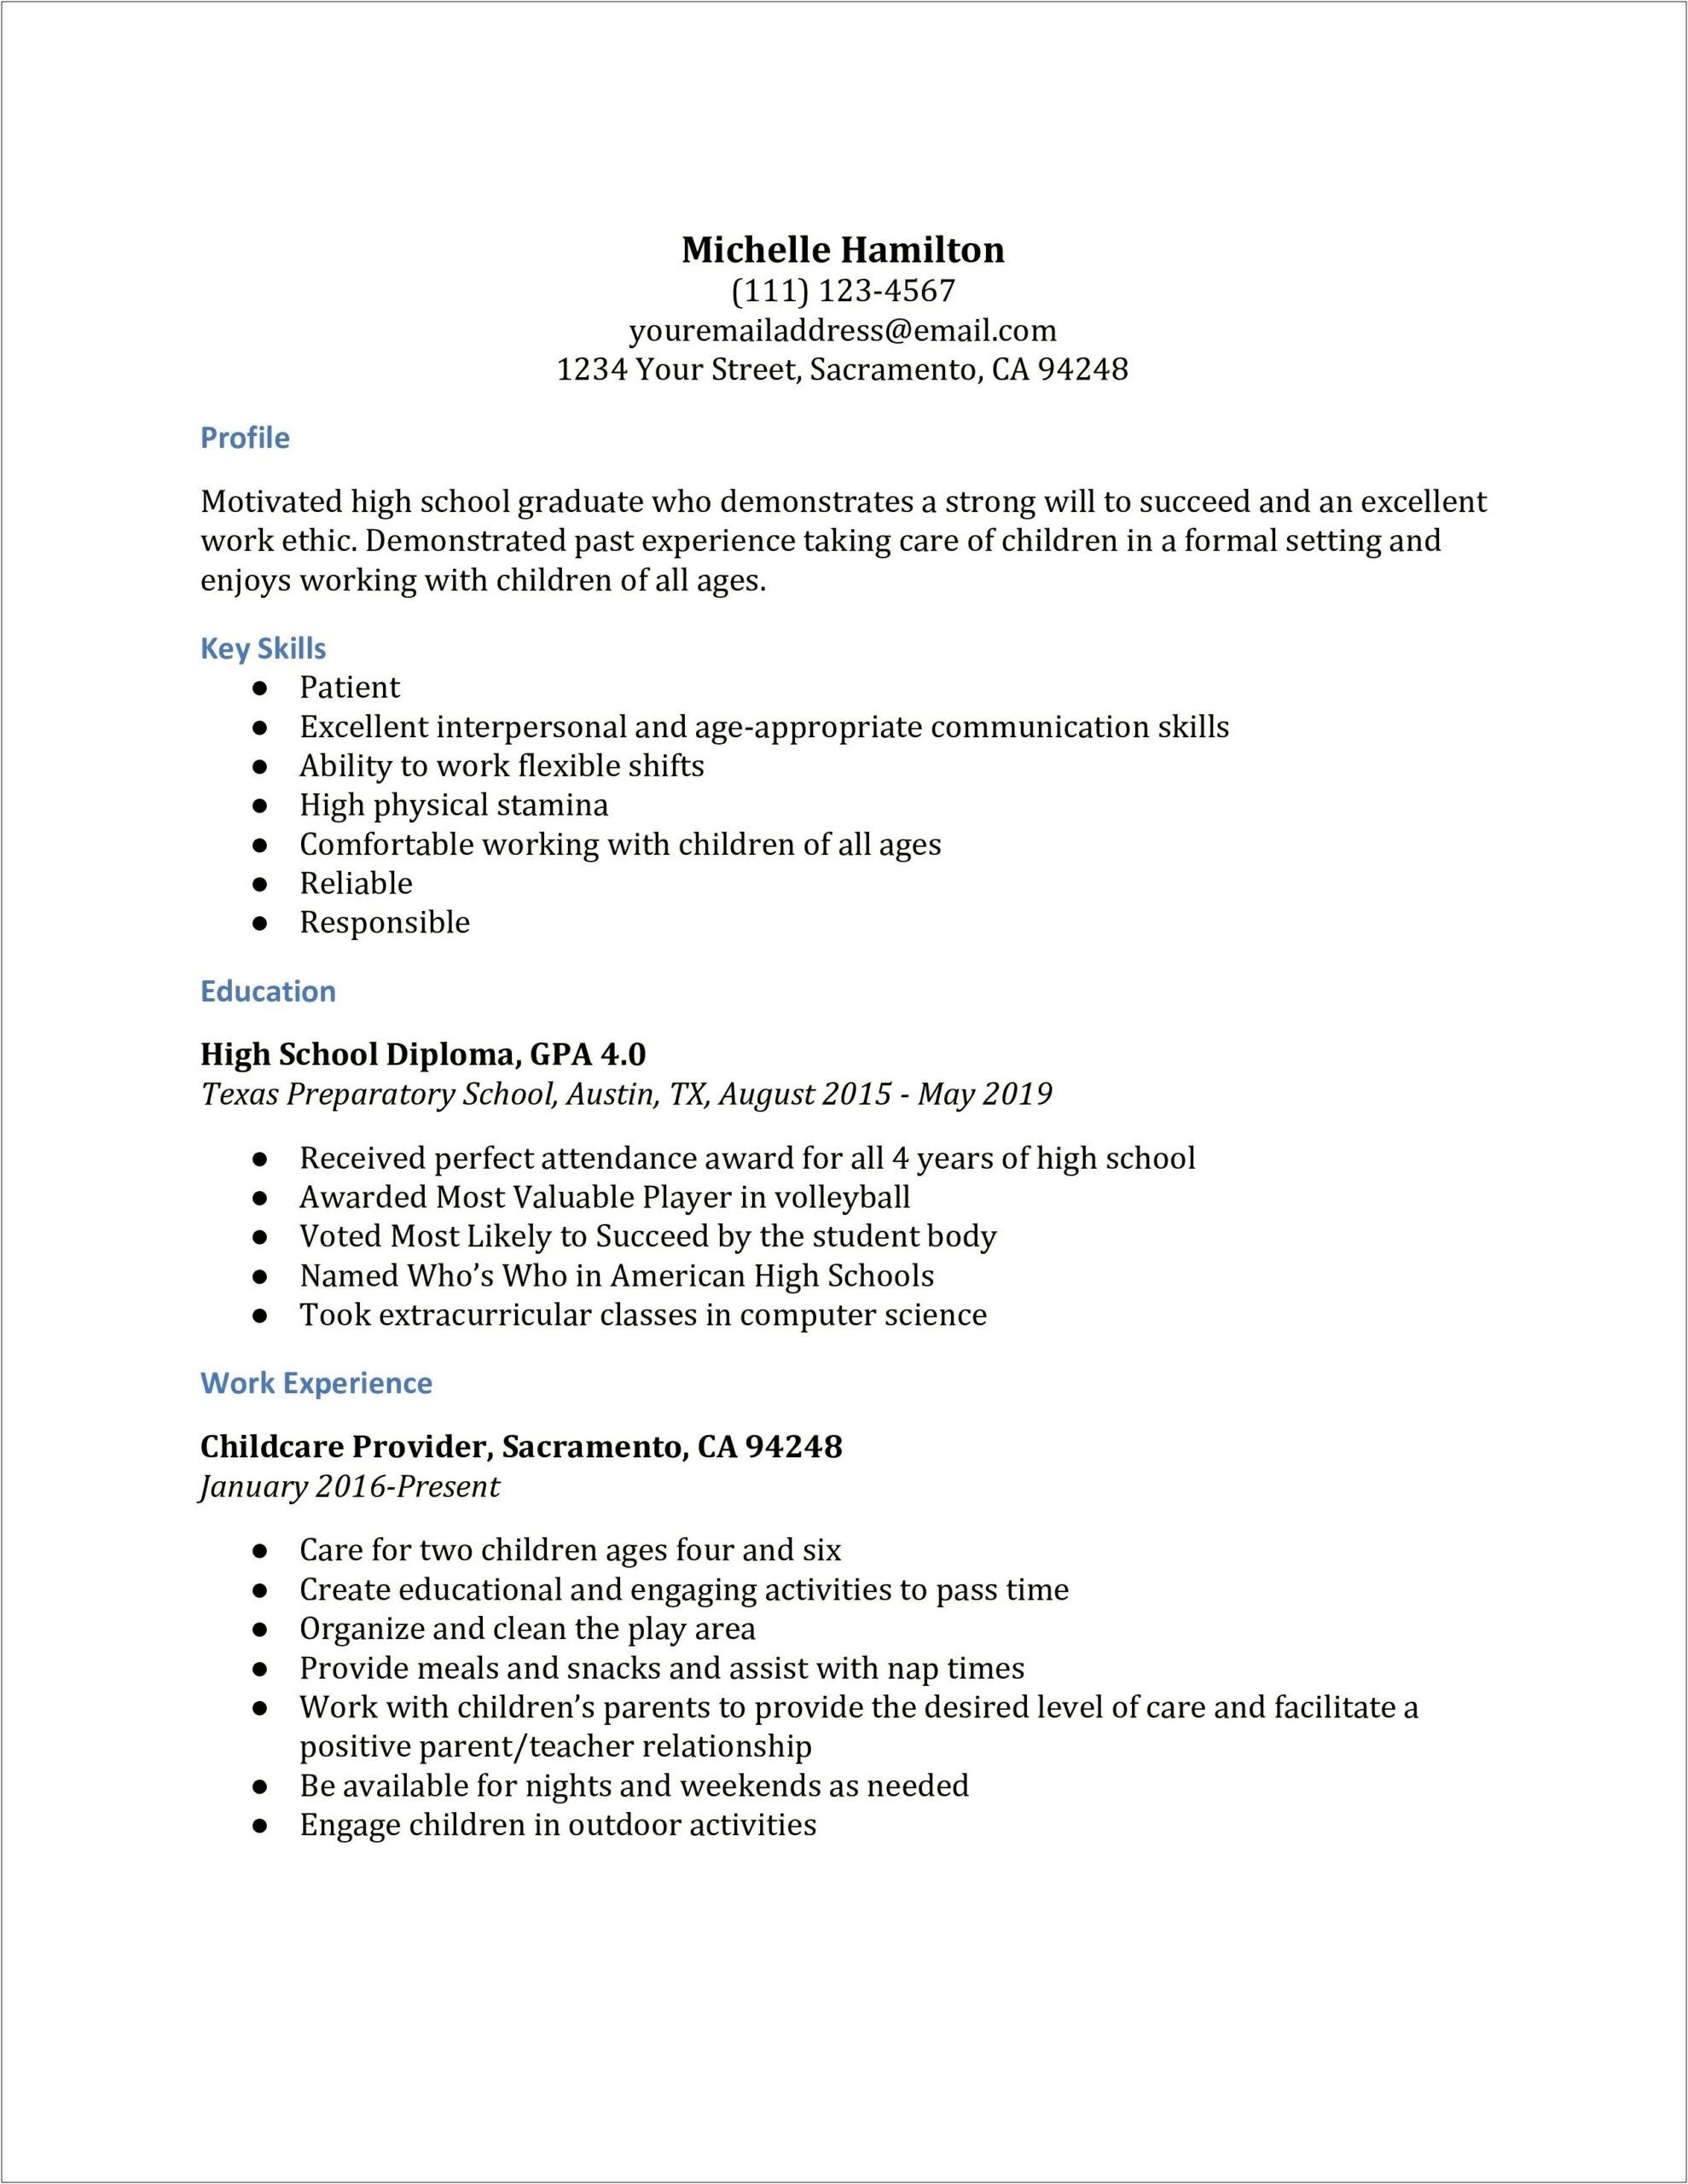 Skills And Abilities For High School Graduate Resume